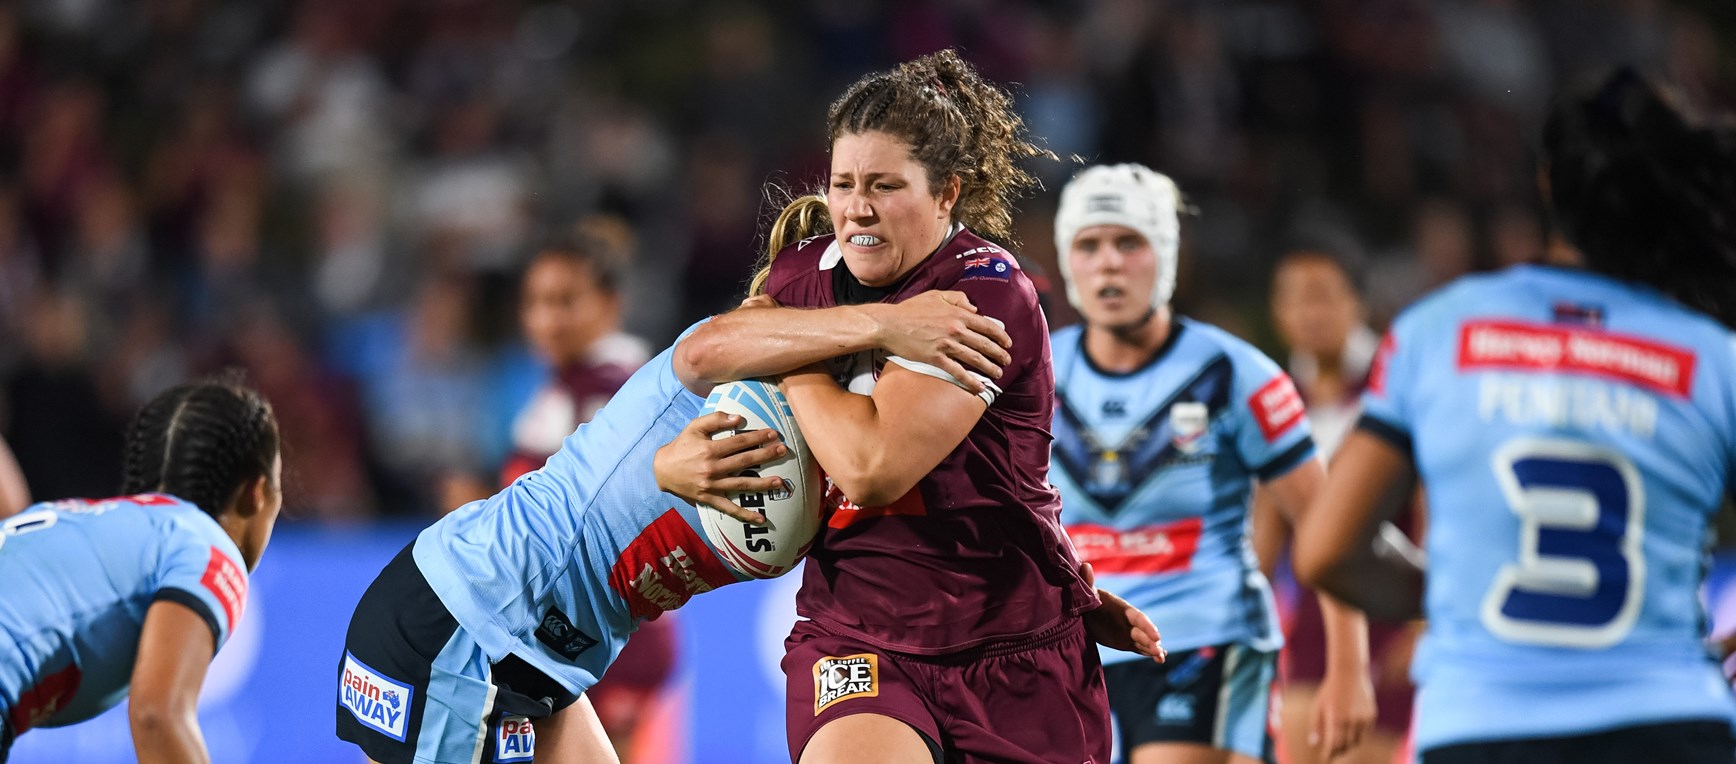 In pictures: Maroons secure home Origin win